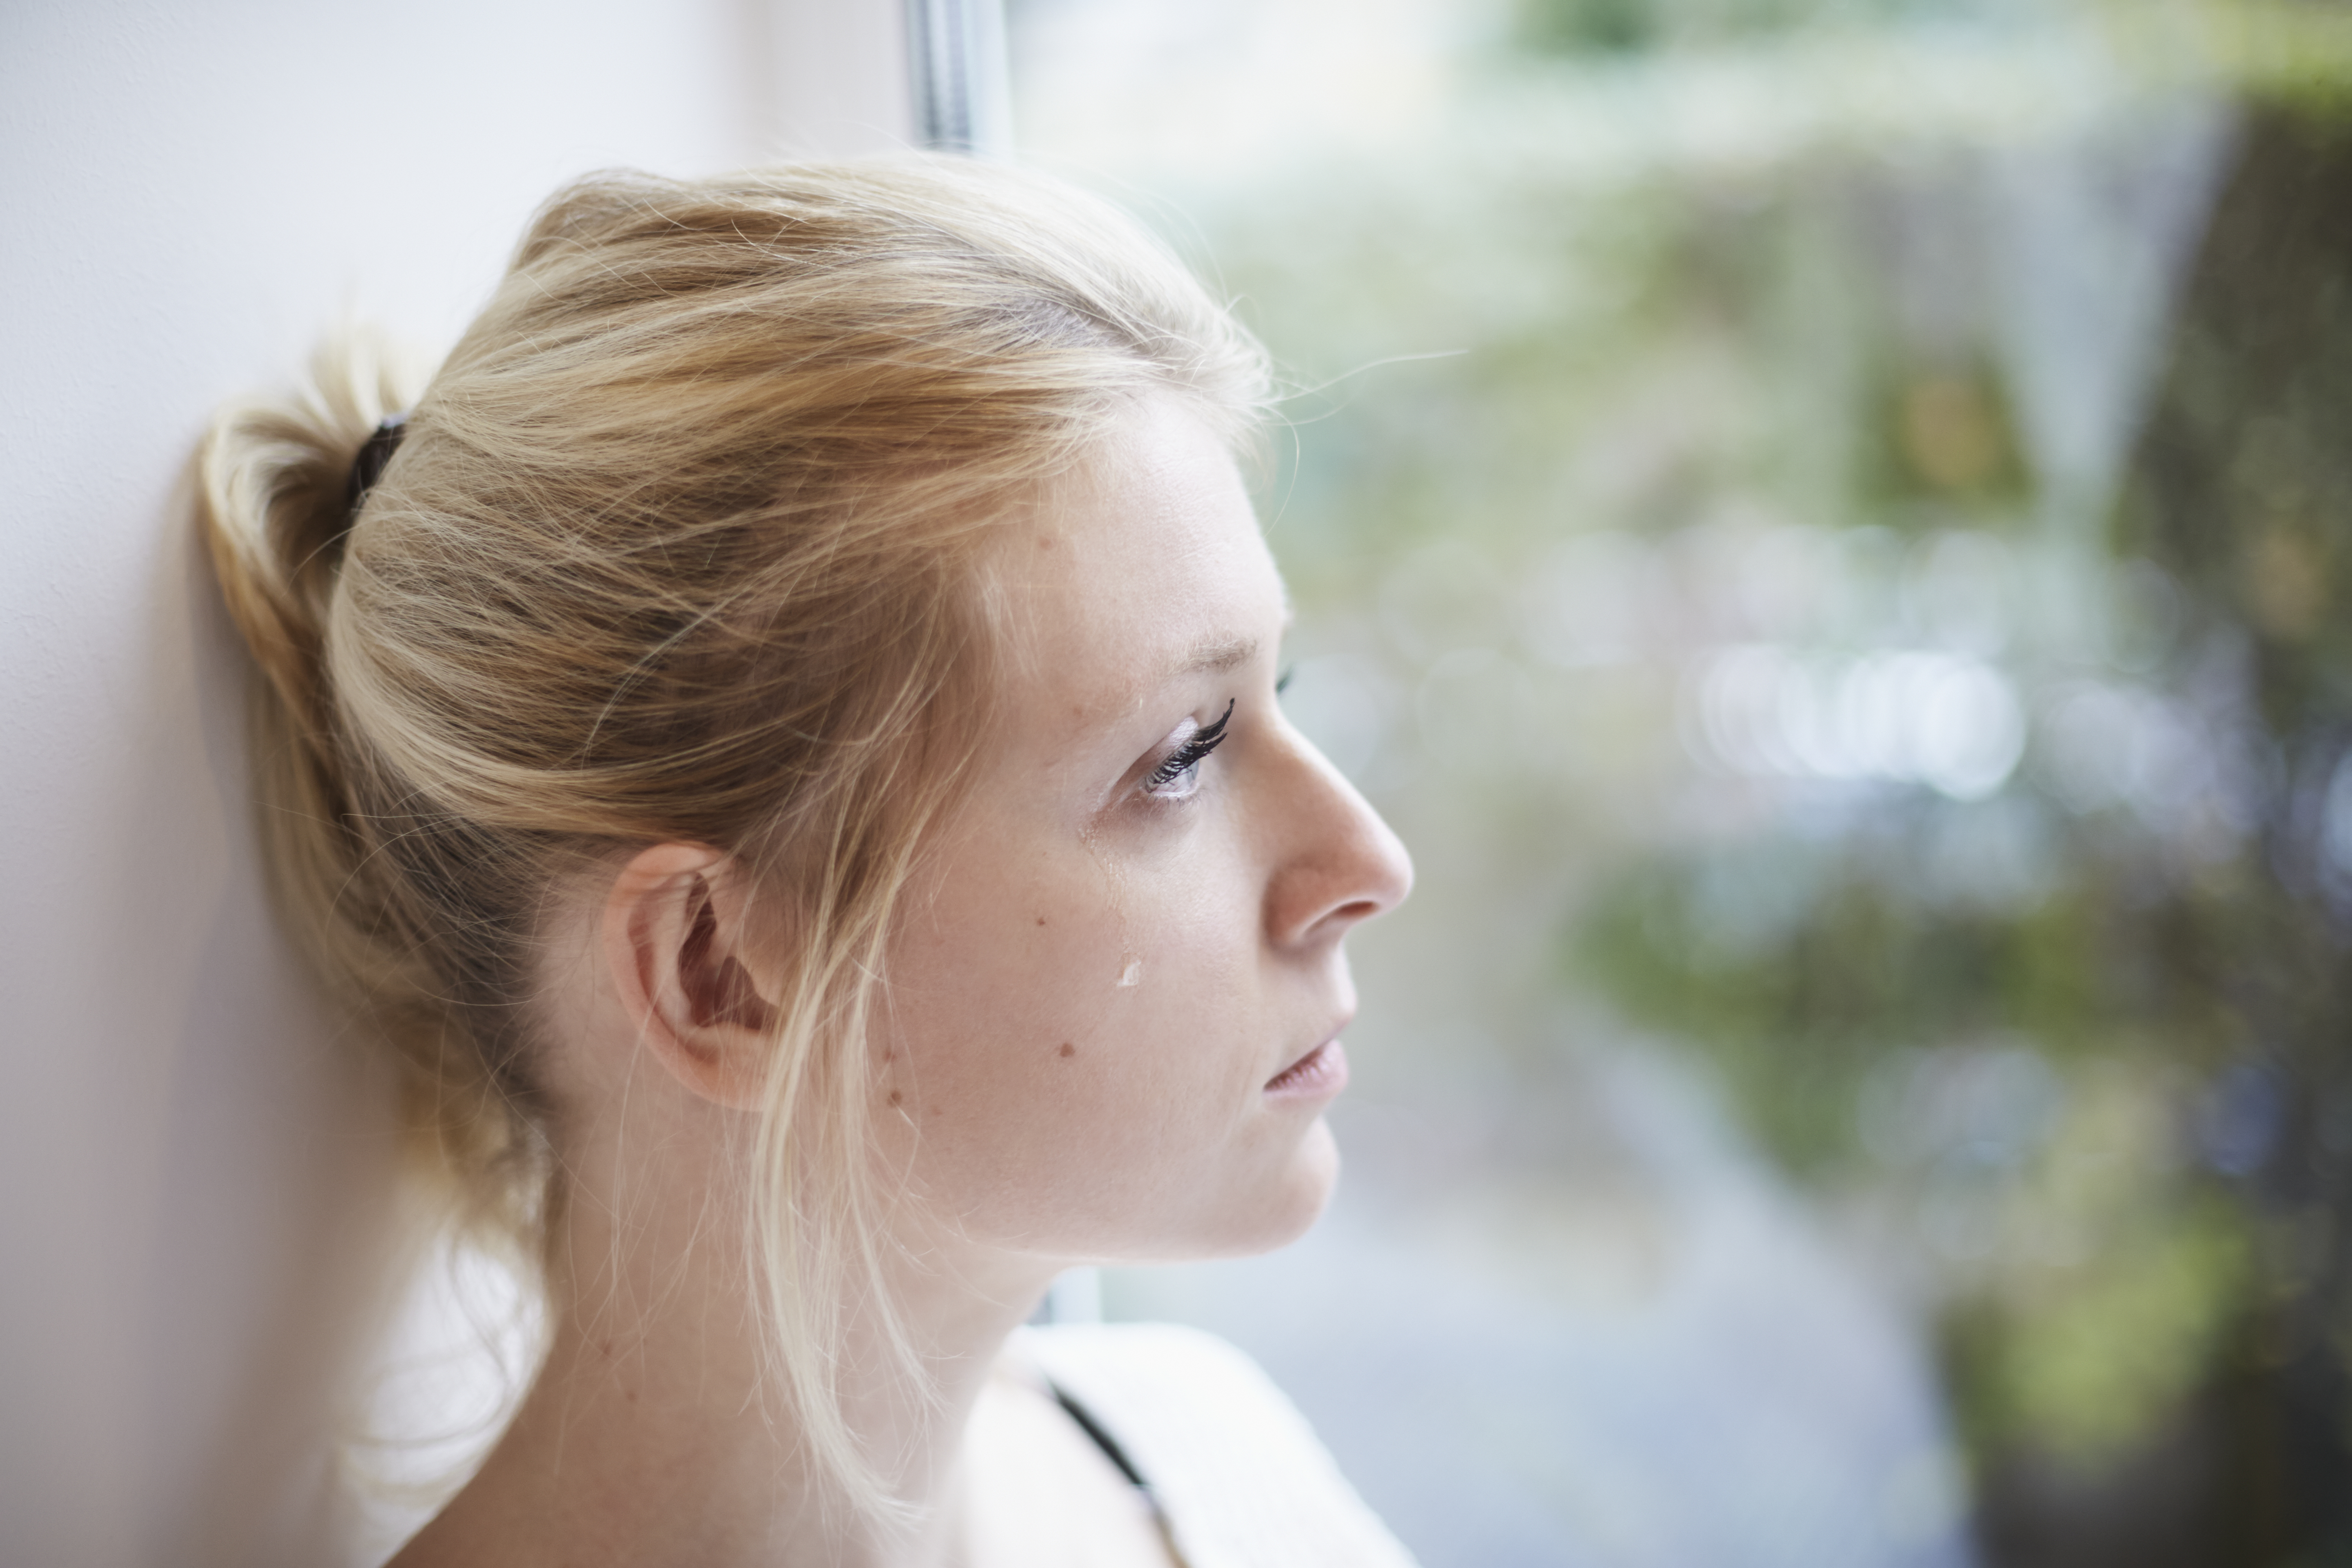 Young woman crying at the window | Source: Getty Images